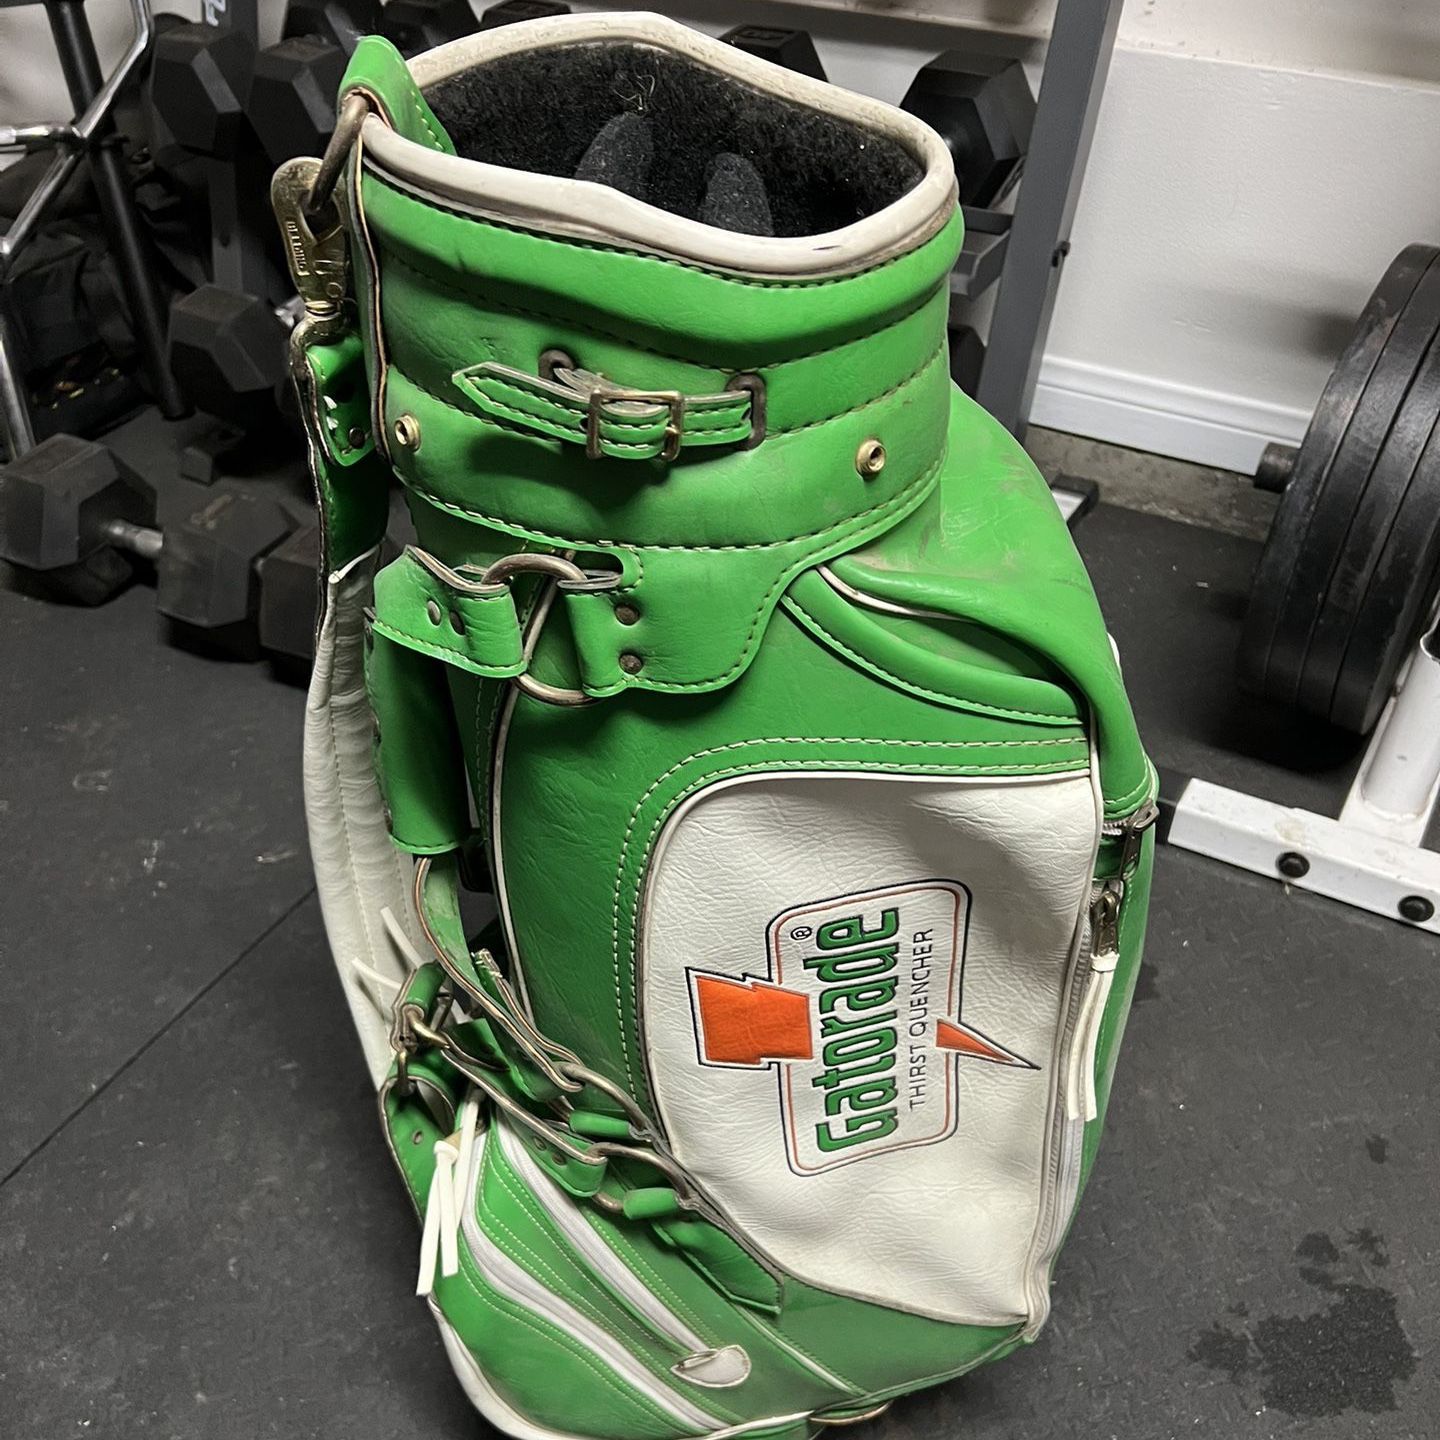 70s authentic rare Gucci golf bag for Sale in Apple Valley, CA - OfferUp